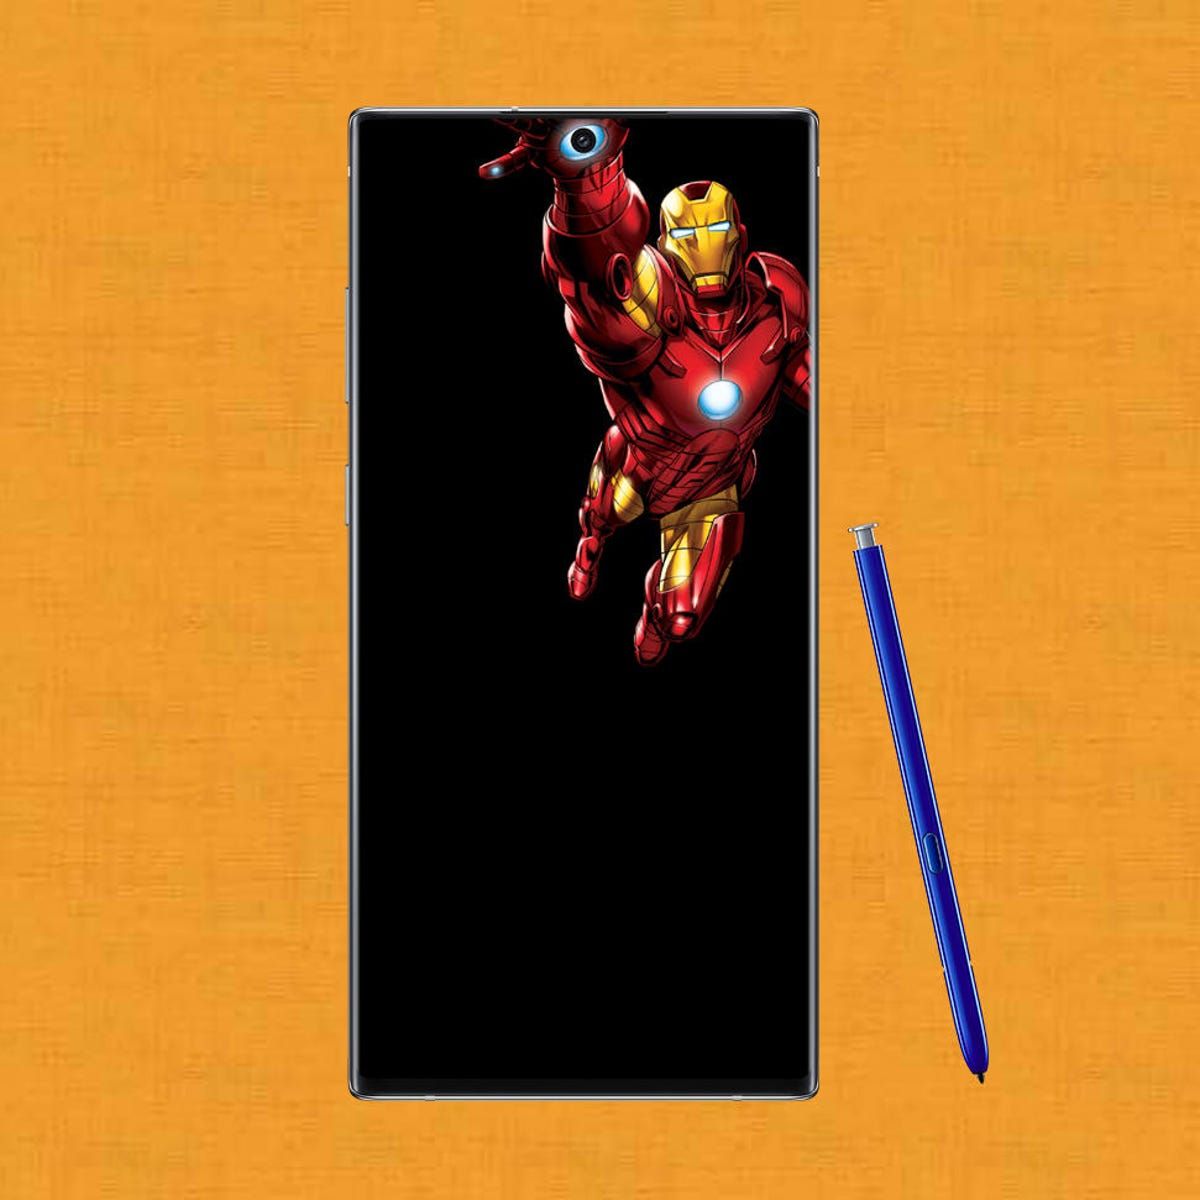 The avengers iron man wallpaper for samsung galaxy note 9 - Marvel